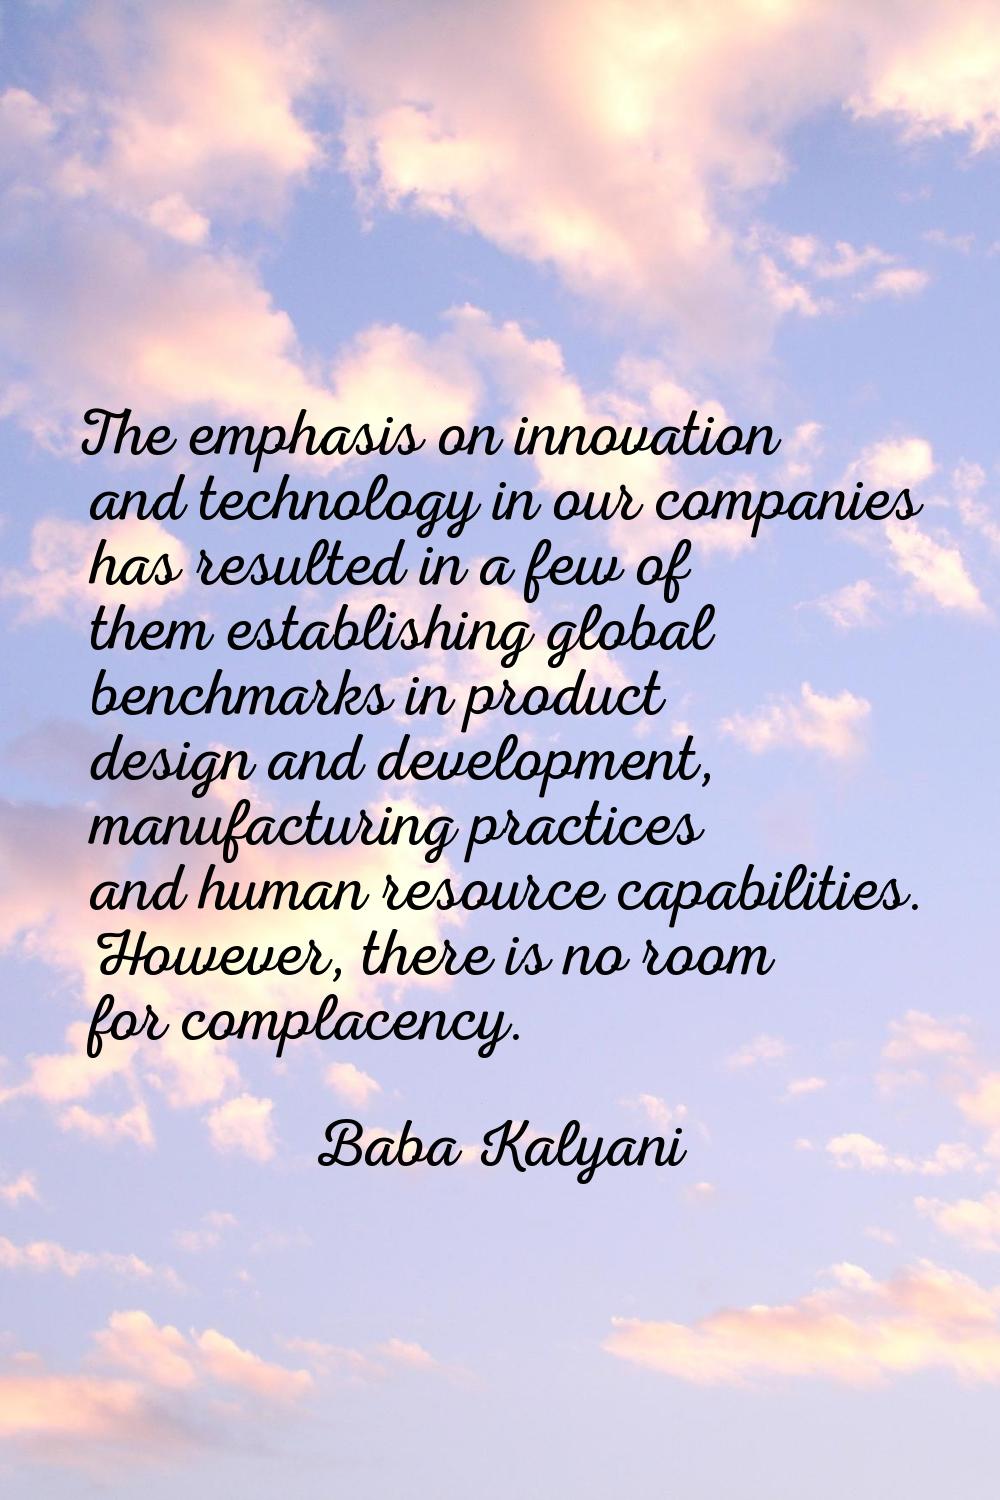 The emphasis on innovation and technology in our companies has resulted in a few of them establishi